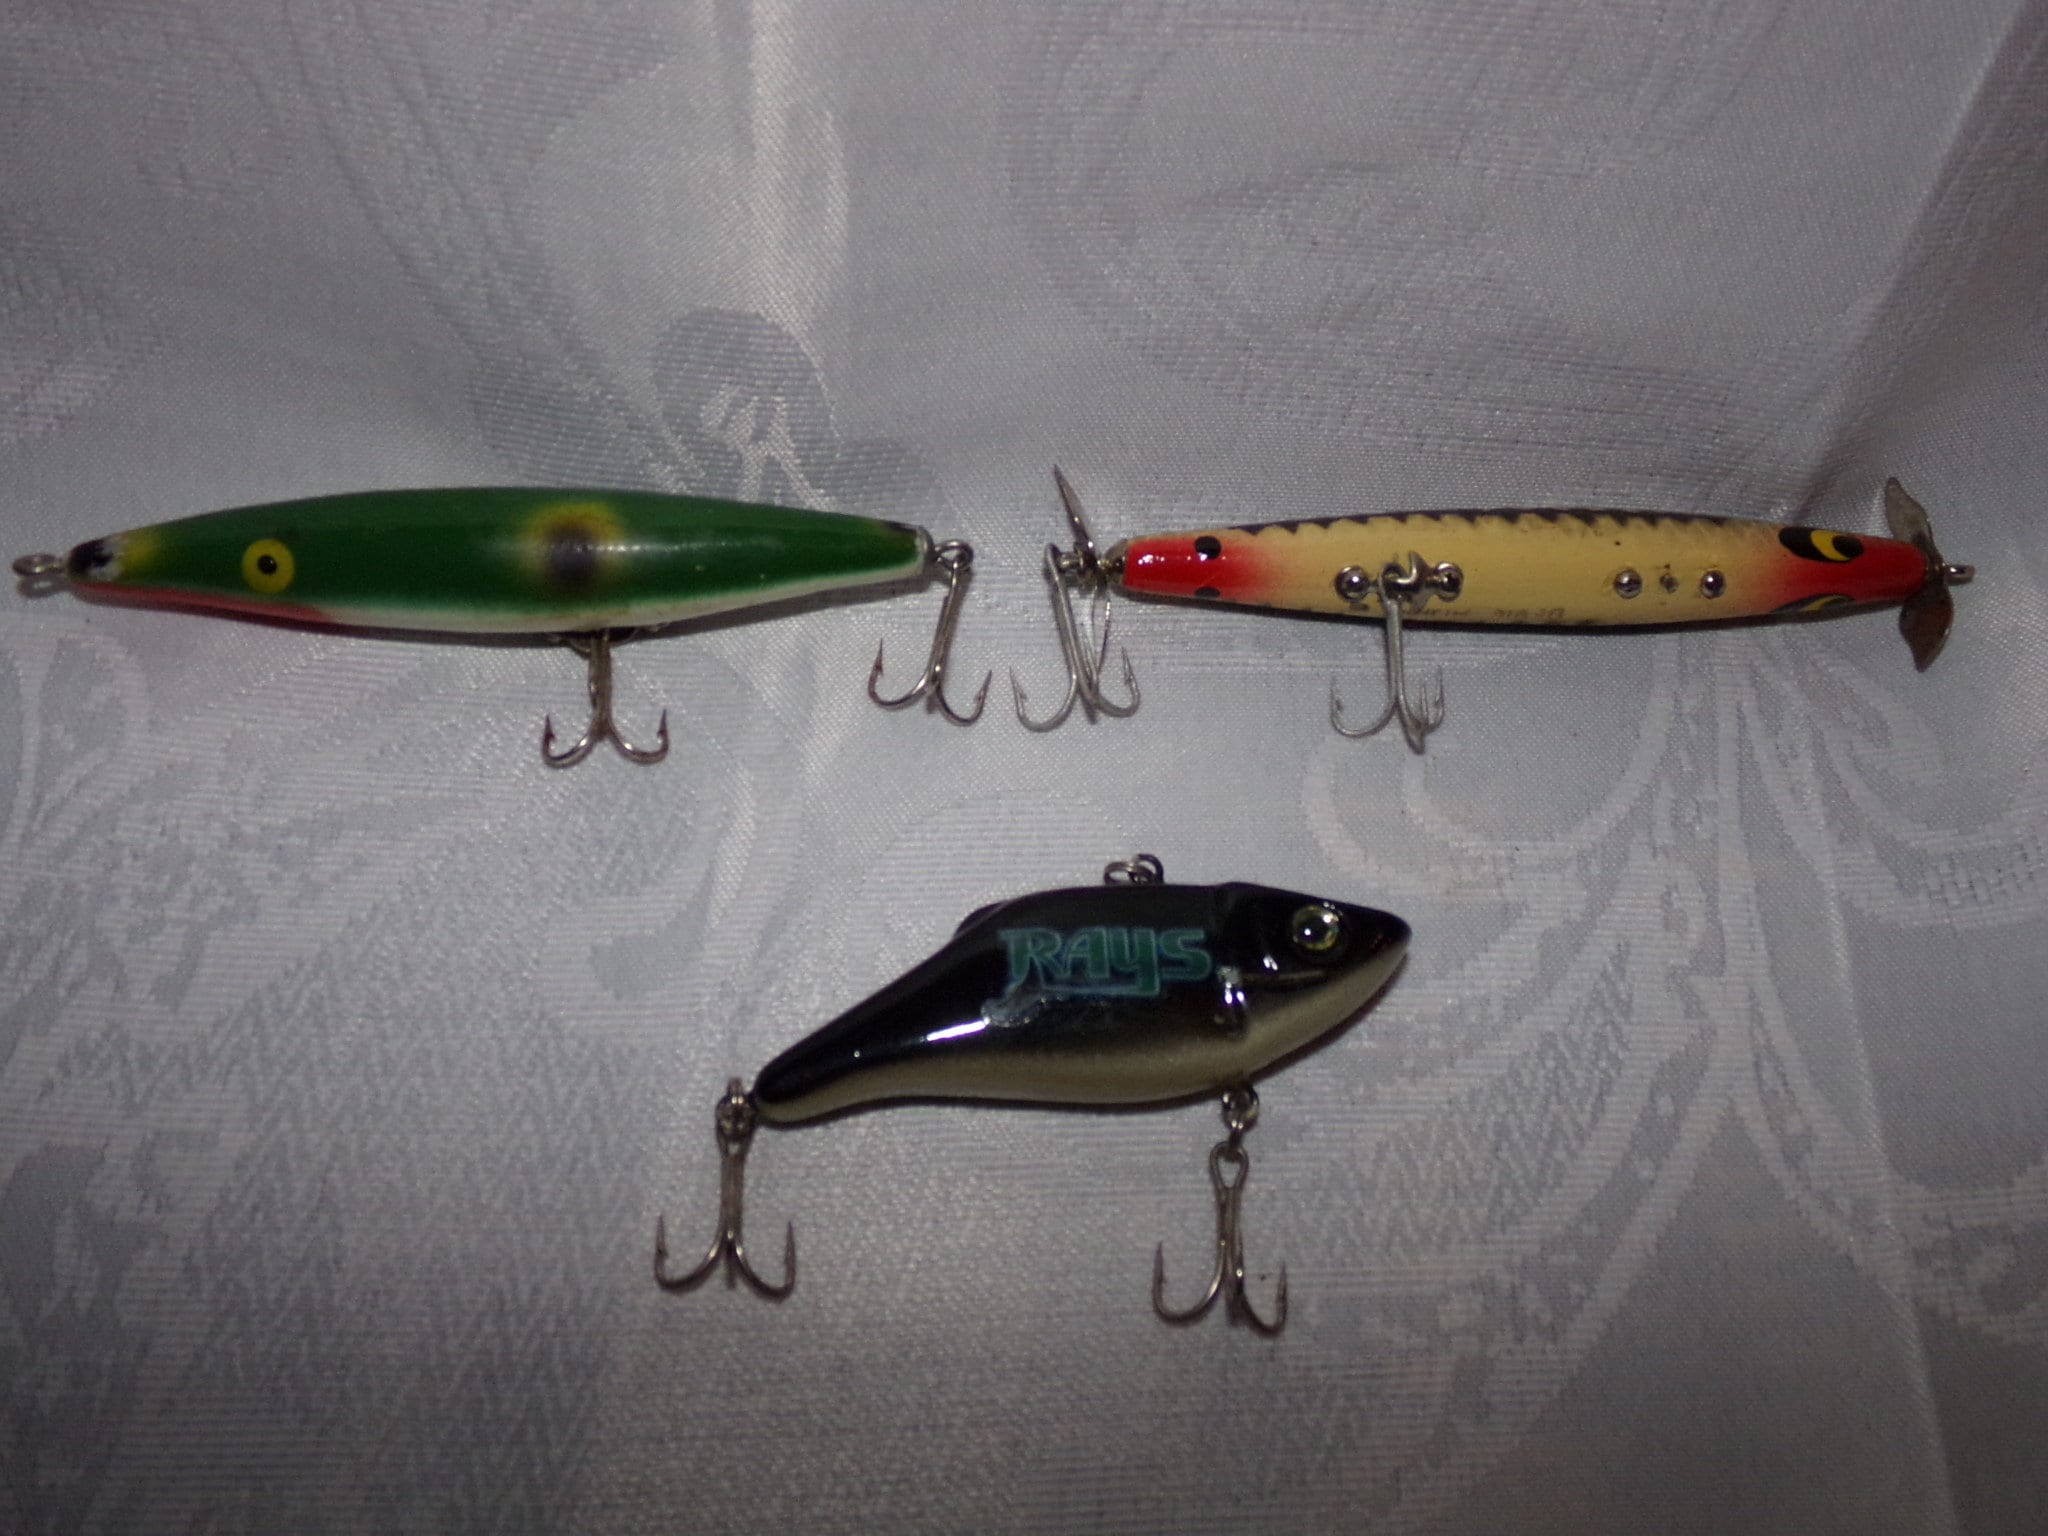 Vintage Rare Fishing Lures / set of 3 Fishing Lures / Dewig fishing lure /  Rays Black fish Glass eye Lure / Collection of lures